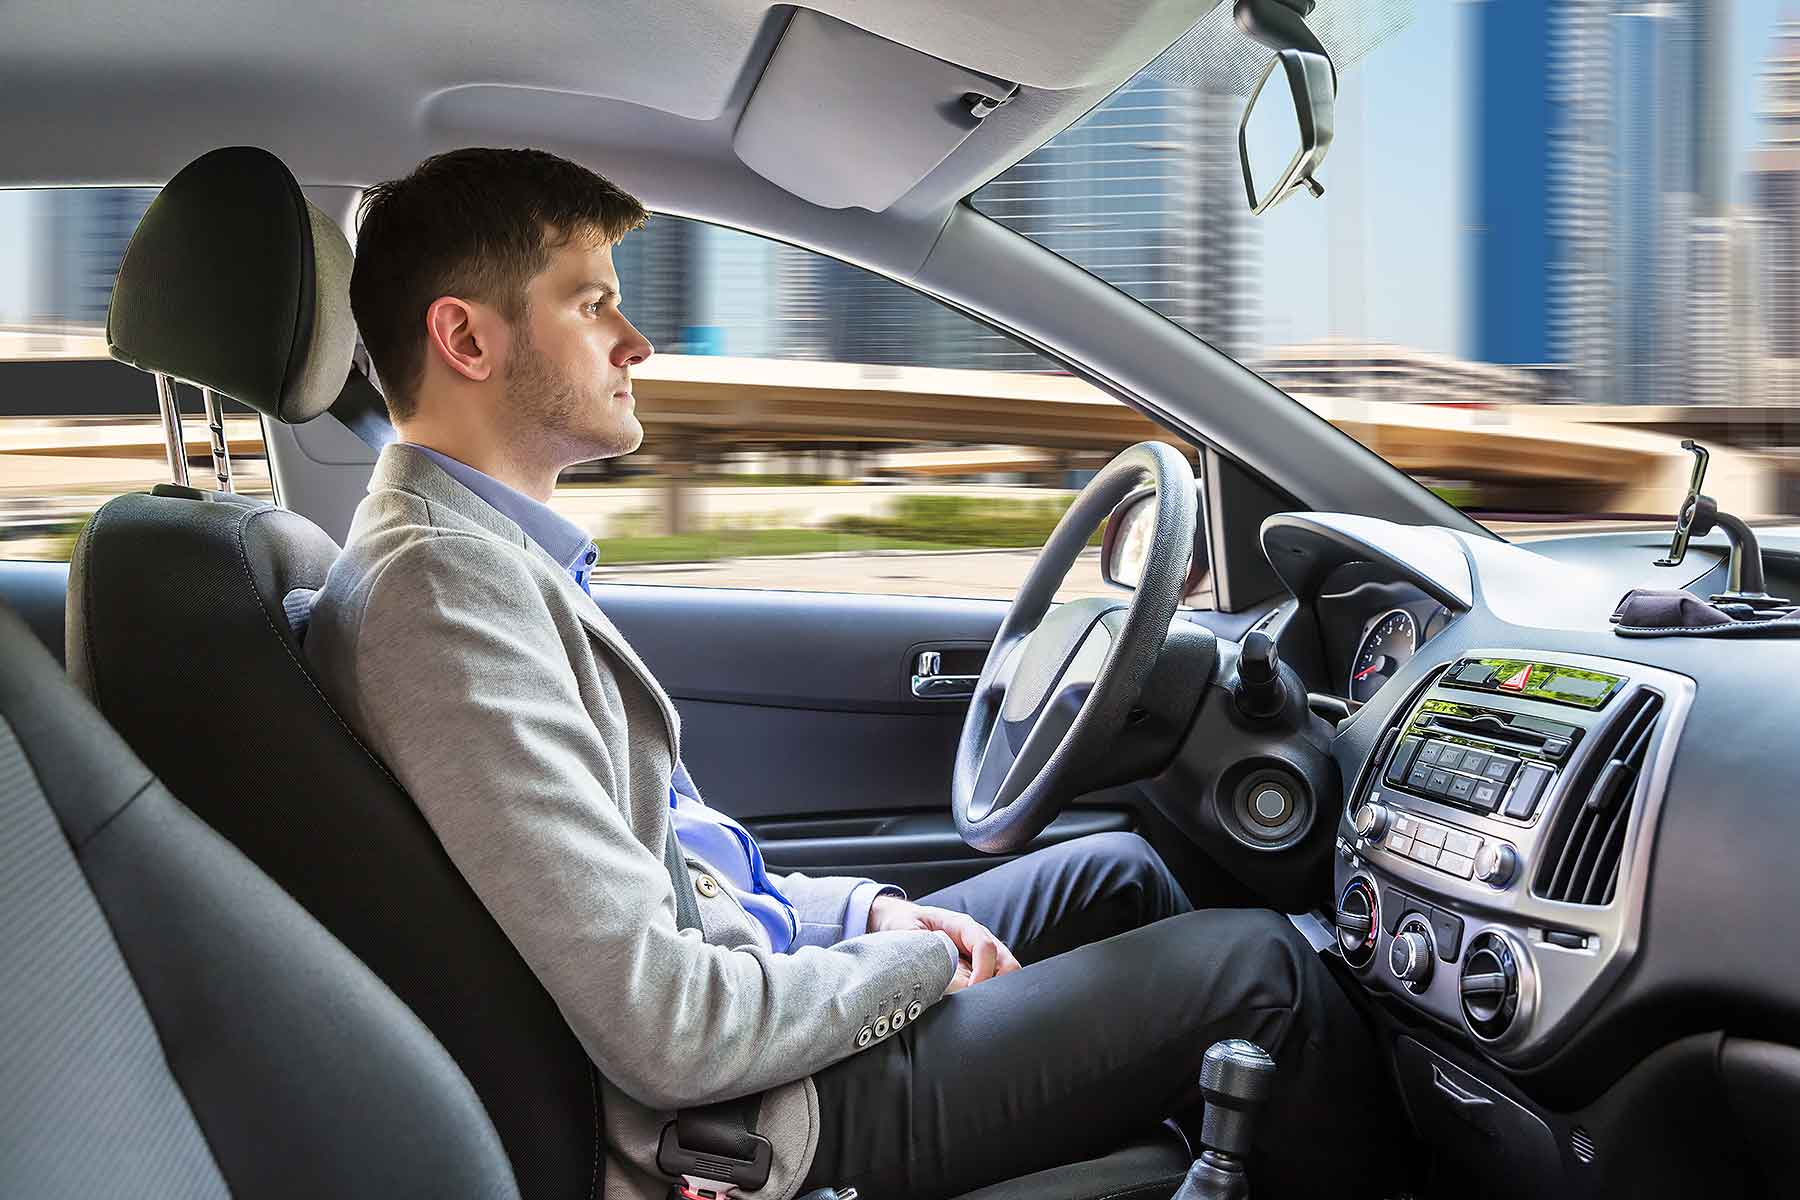 Assisted-drive cars are not autonomous cars